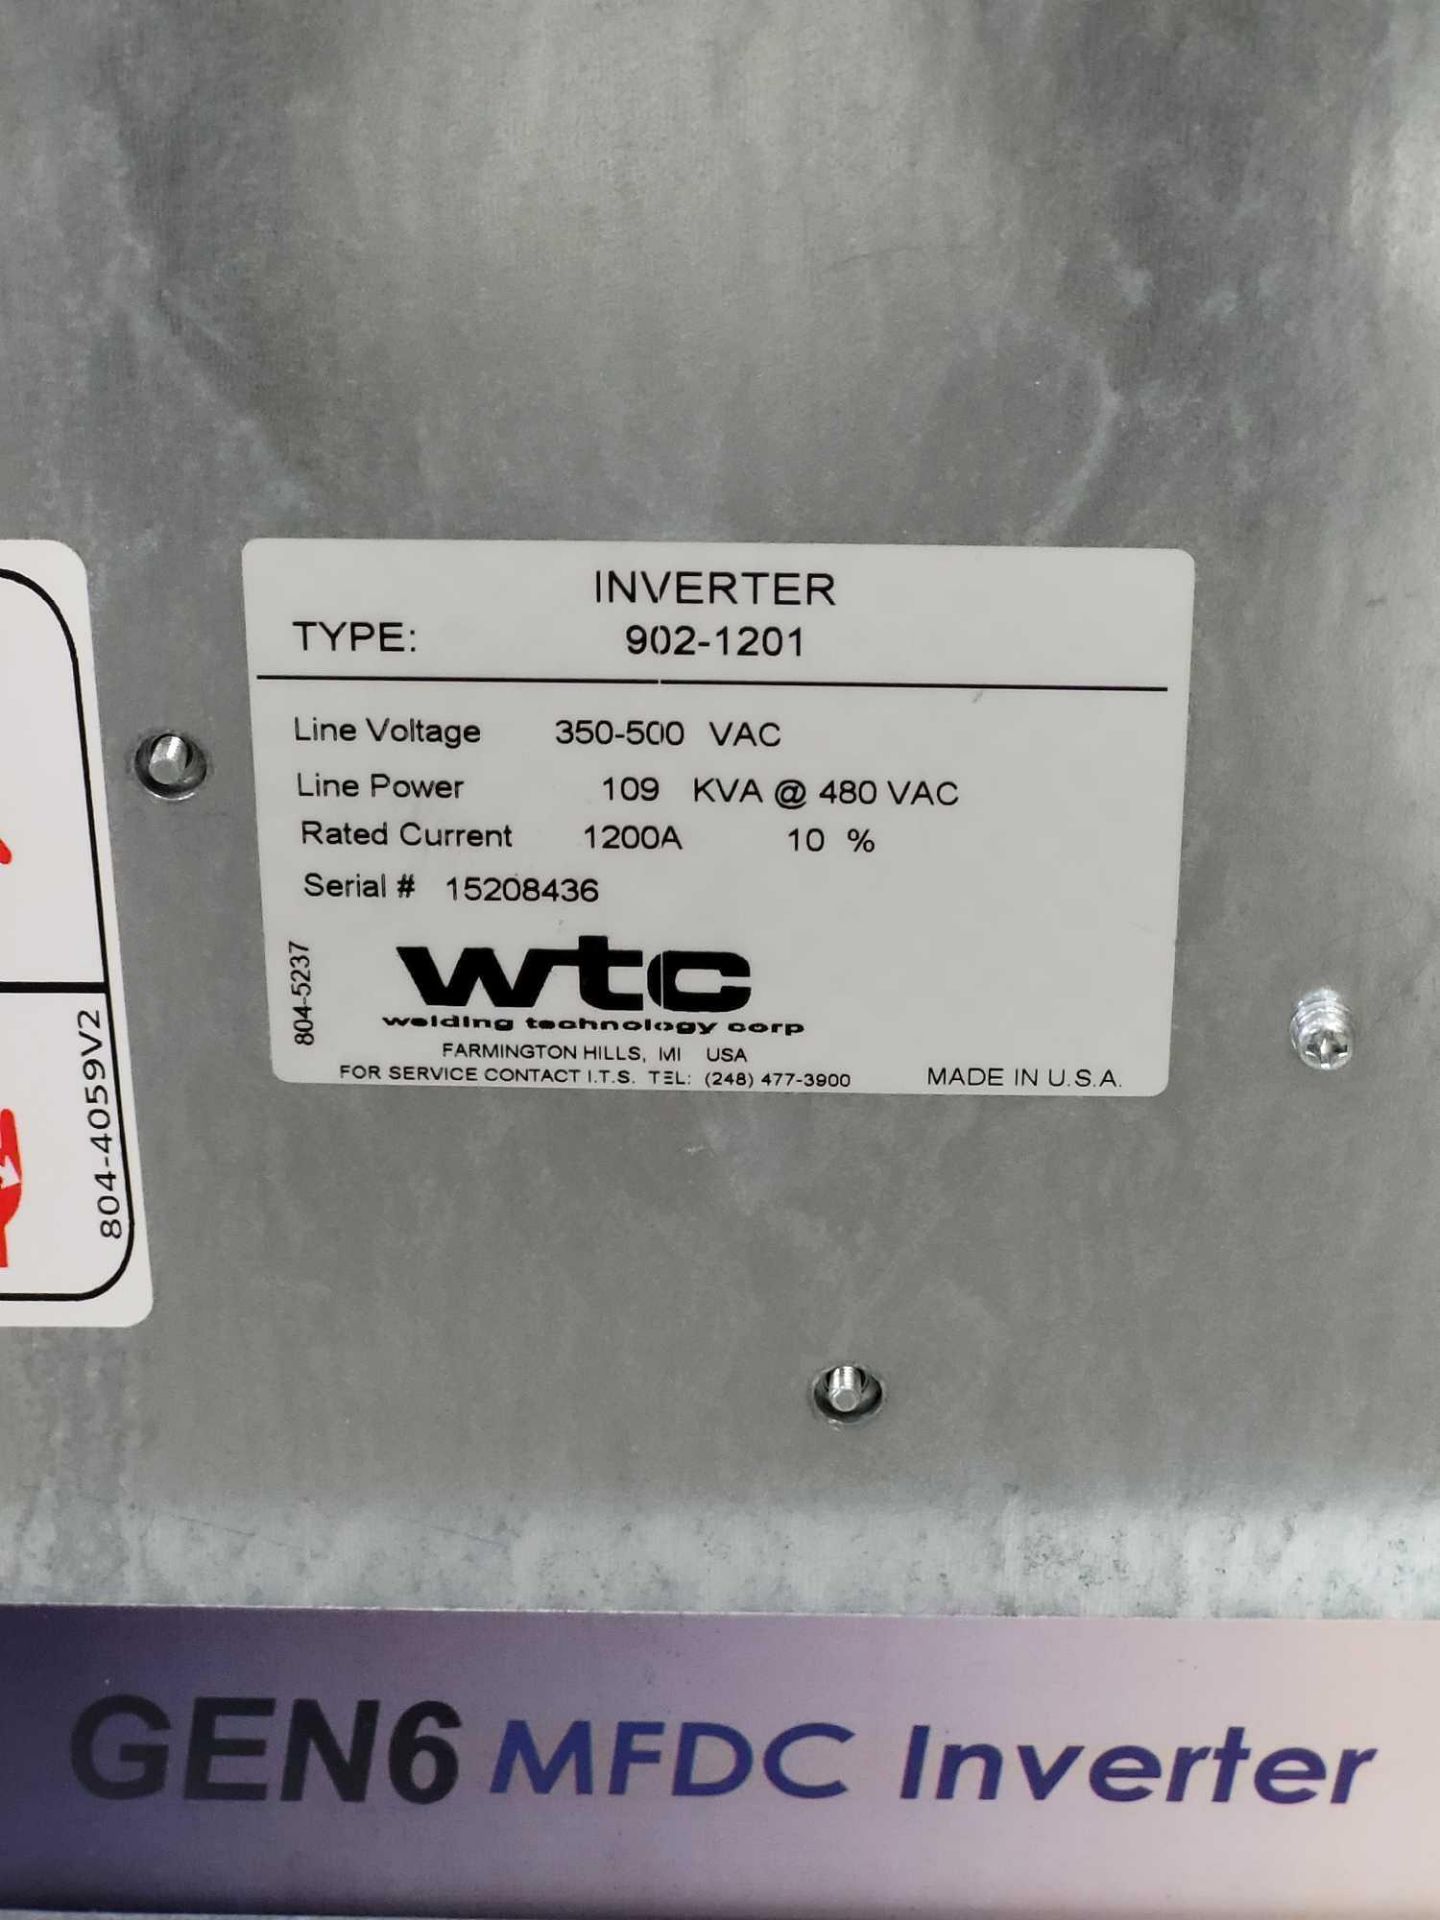 WTC 902-1201 / Gen 6 MFDC Inverter  /  Lot Weight: 105 lbs - Image 6 of 6